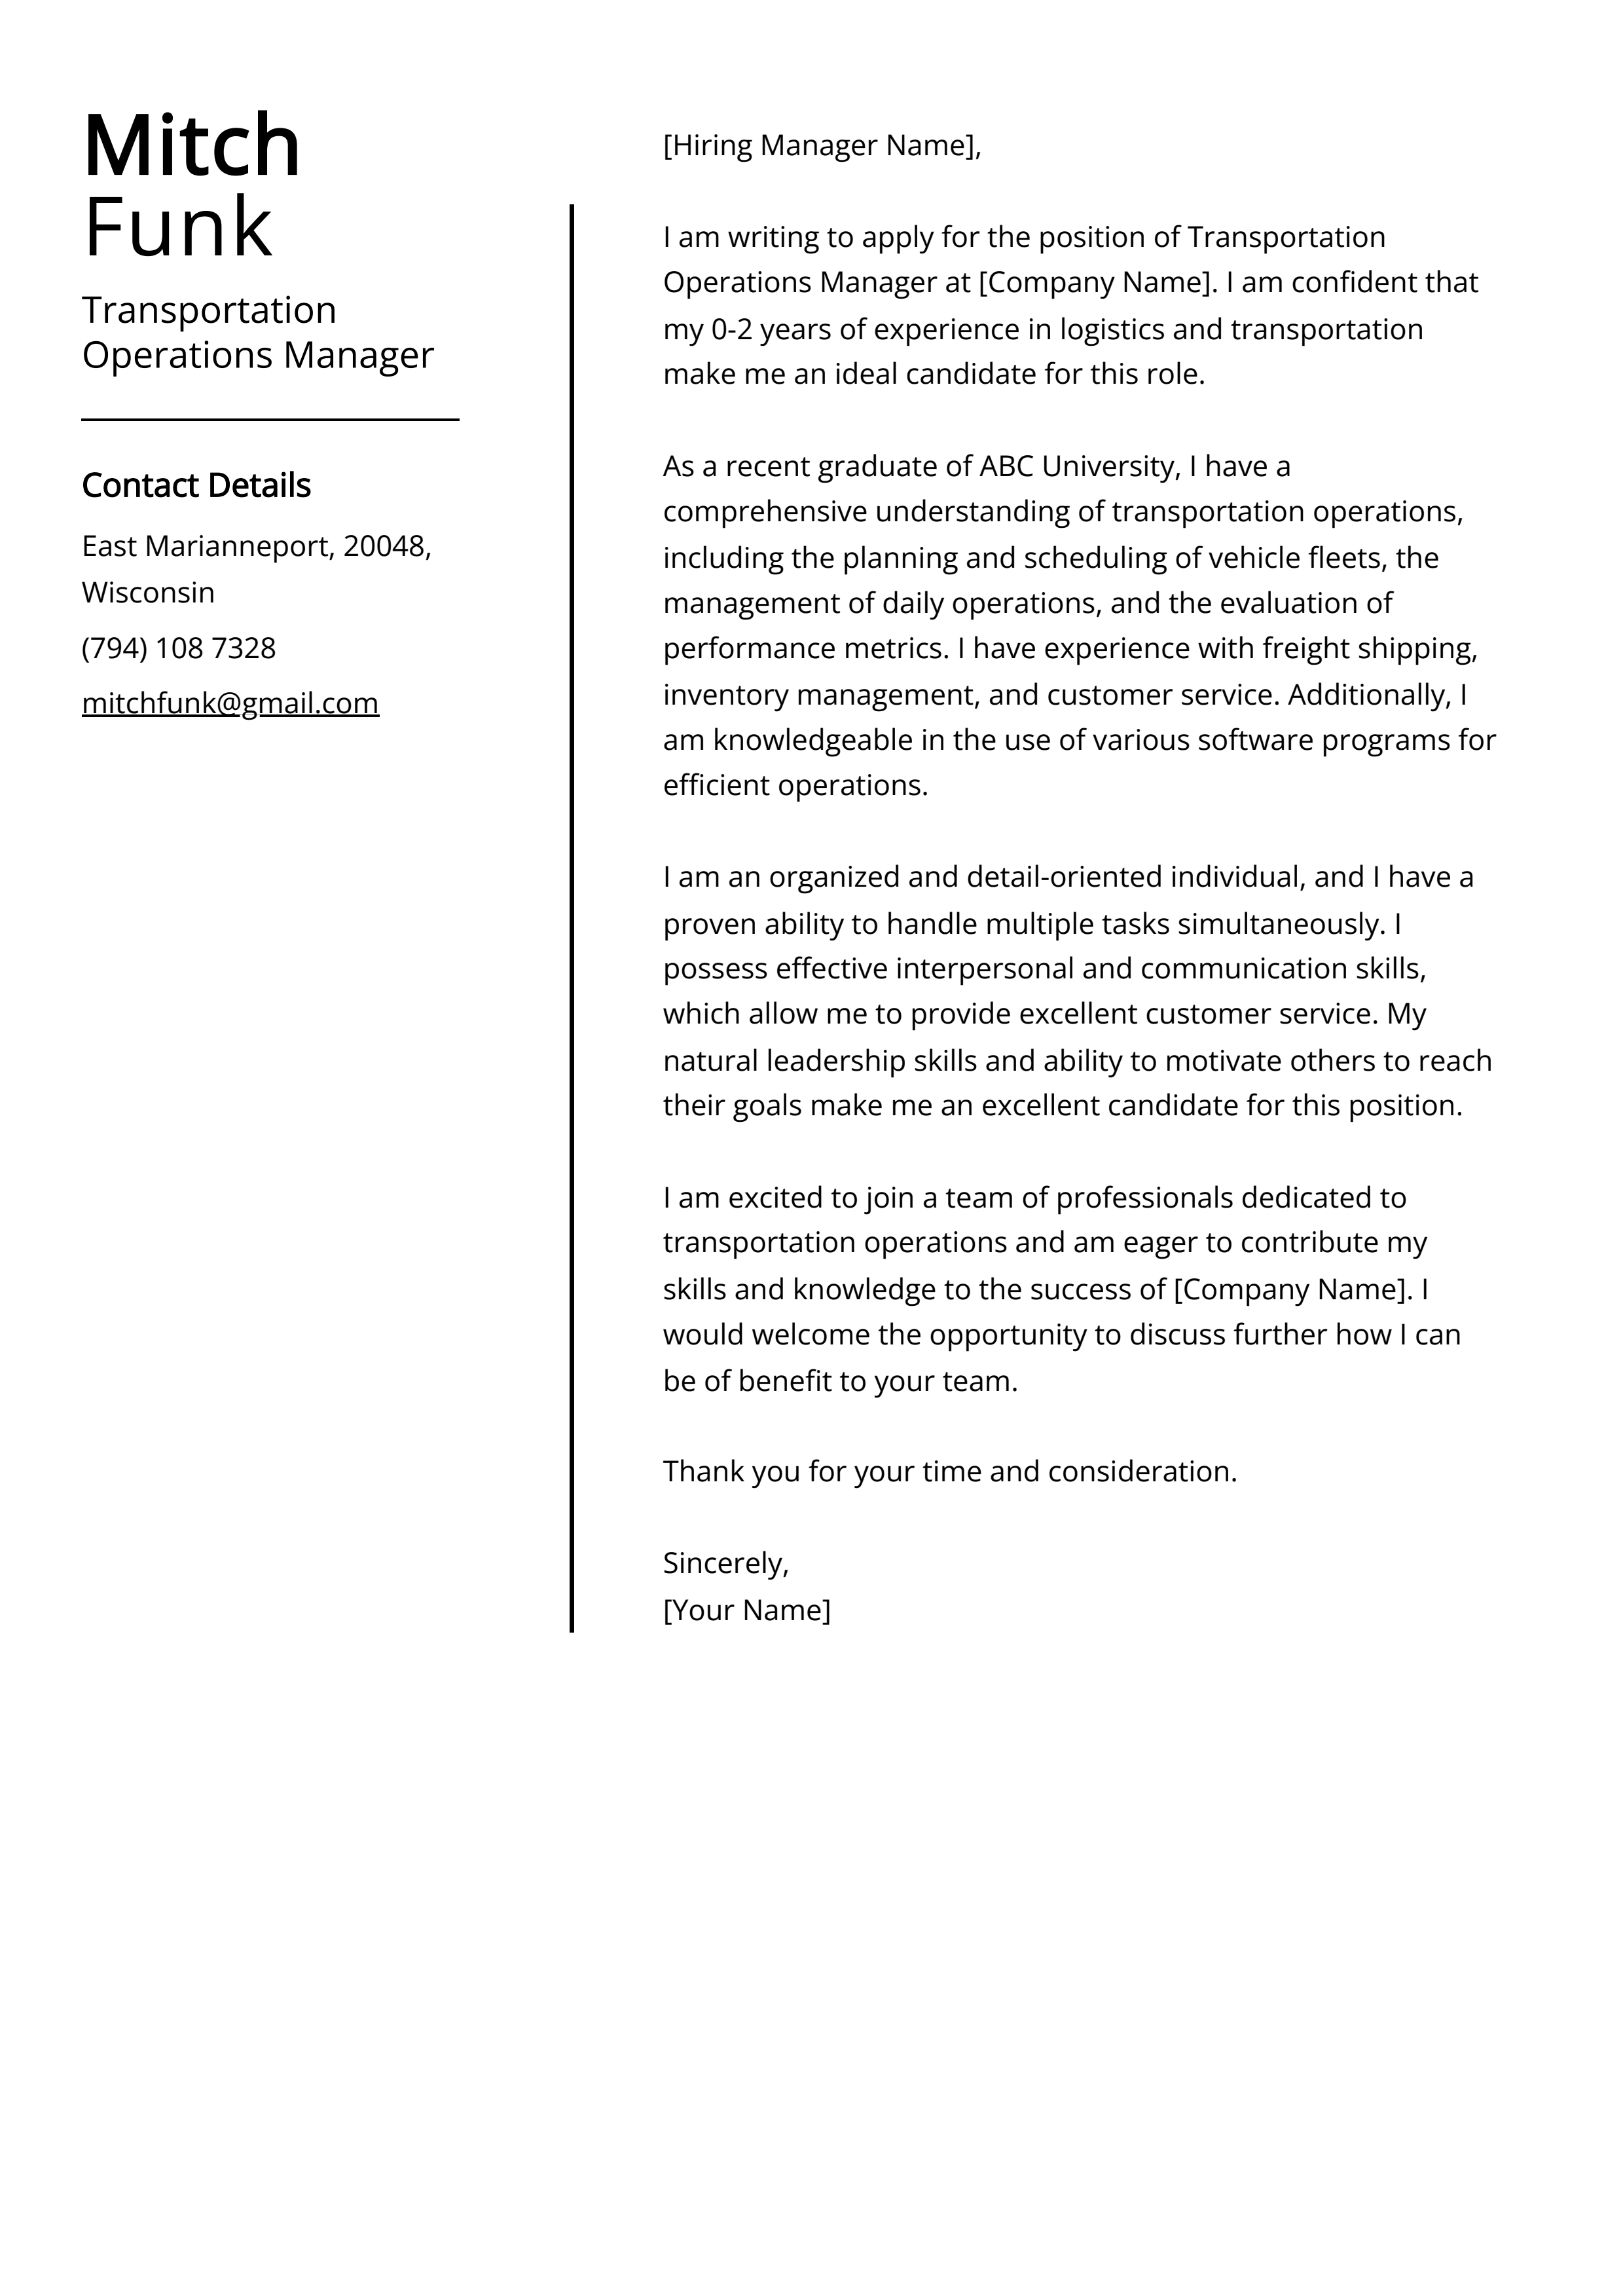 Transportation Operations Manager Cover Letter Example